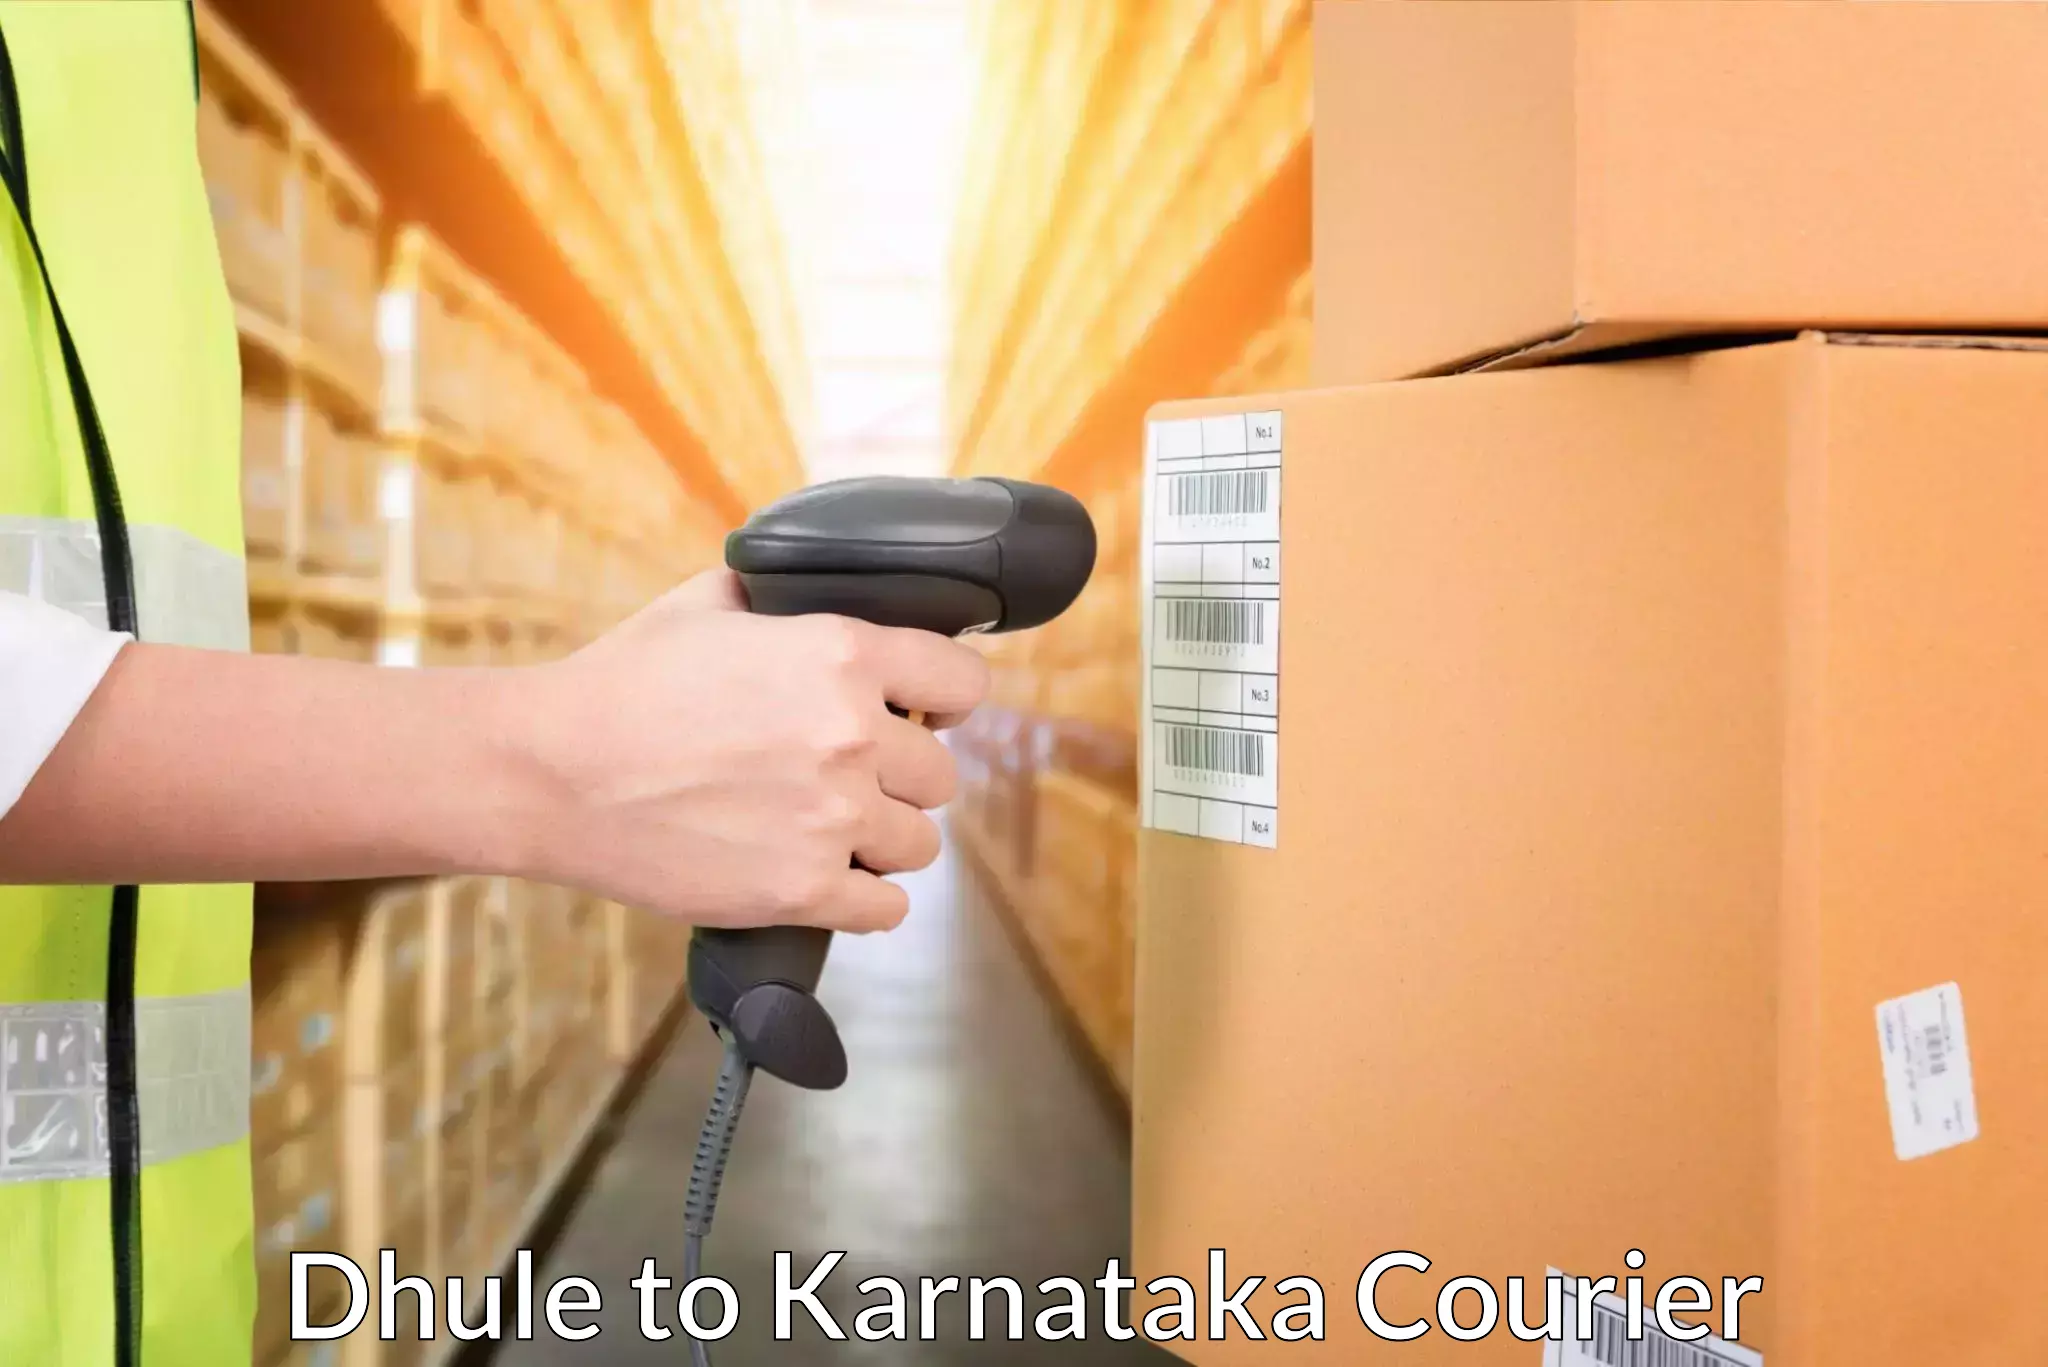 Courier tracking online Dhule to Mangalore Port